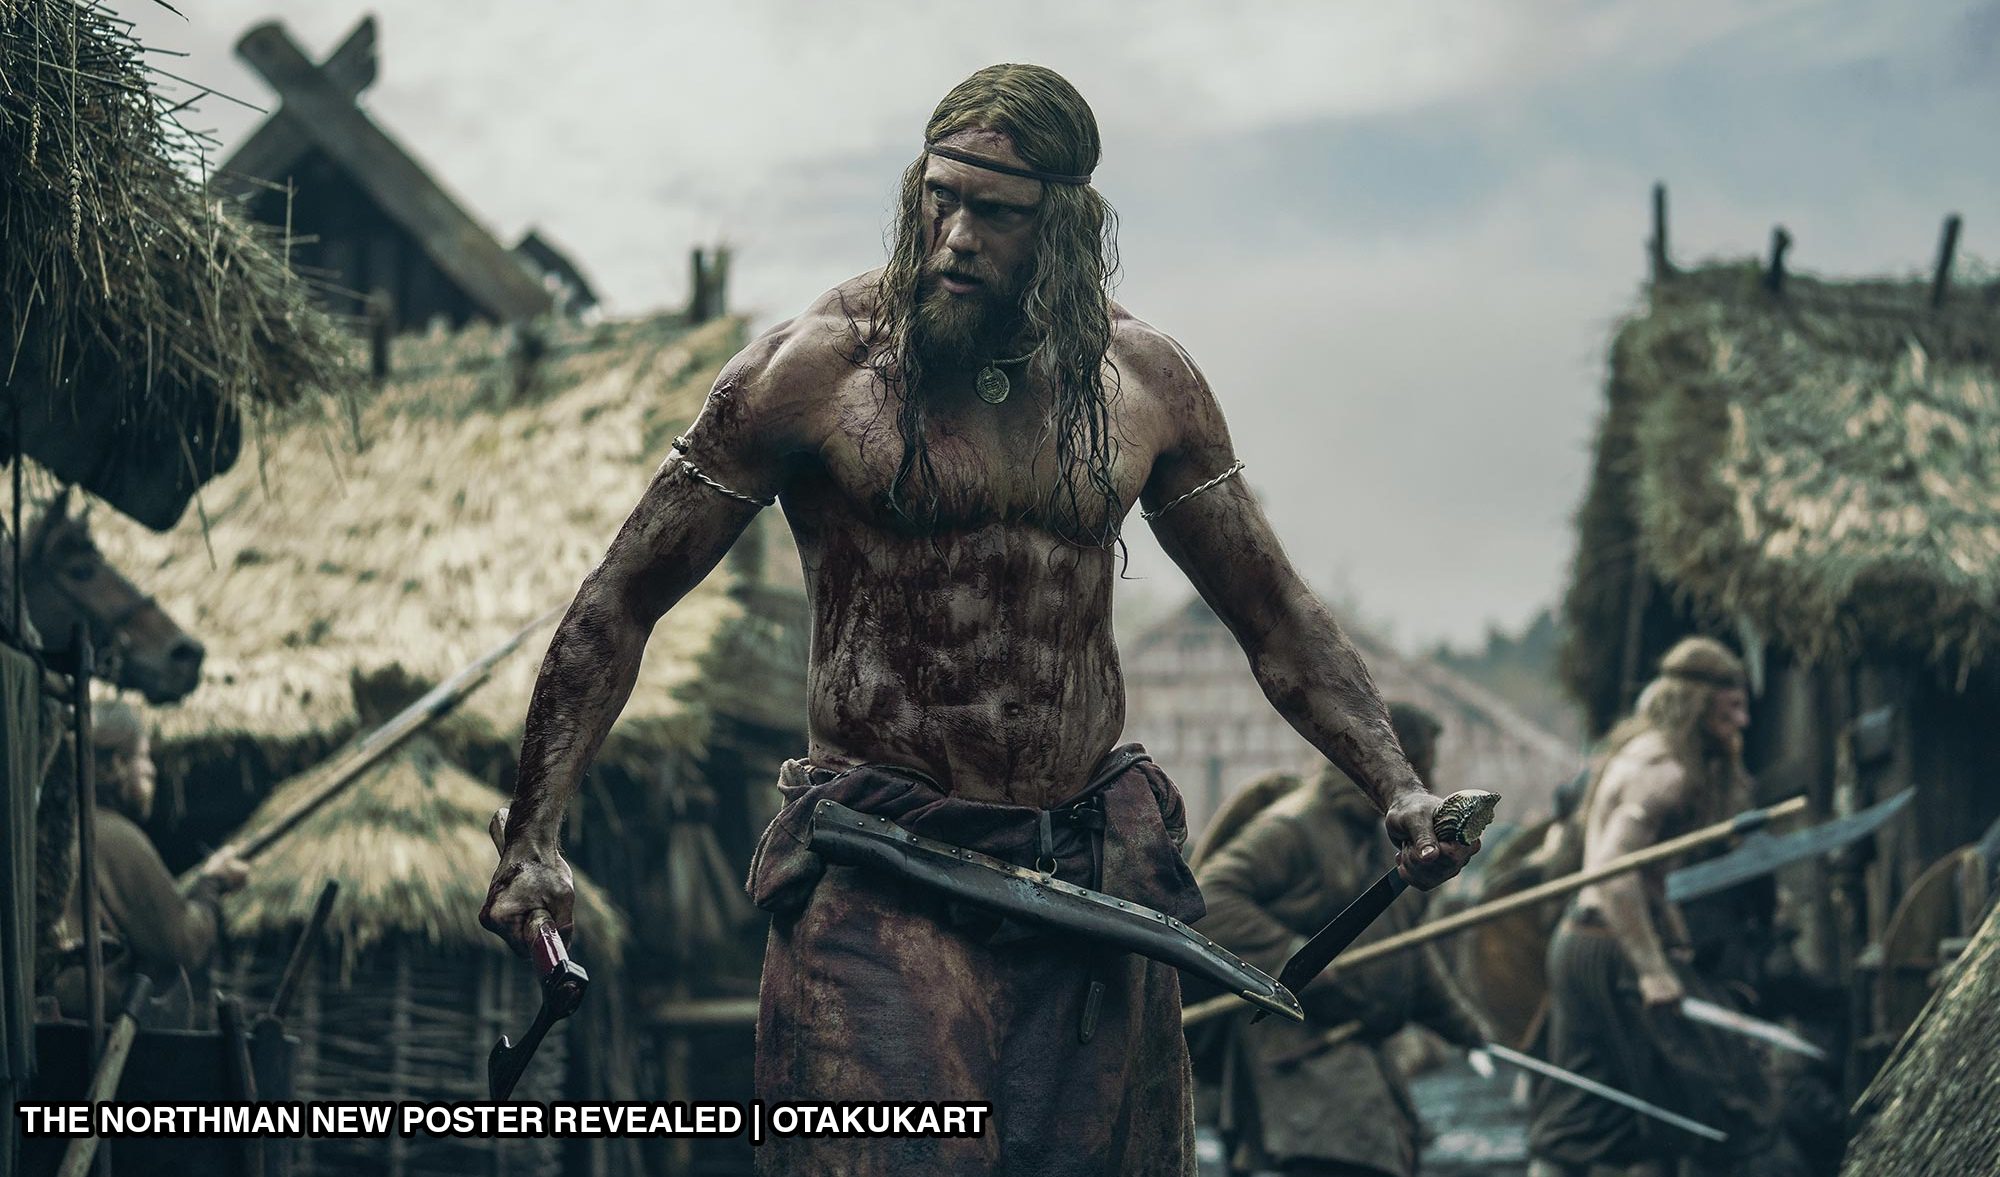 The Northman New Poster Revealed